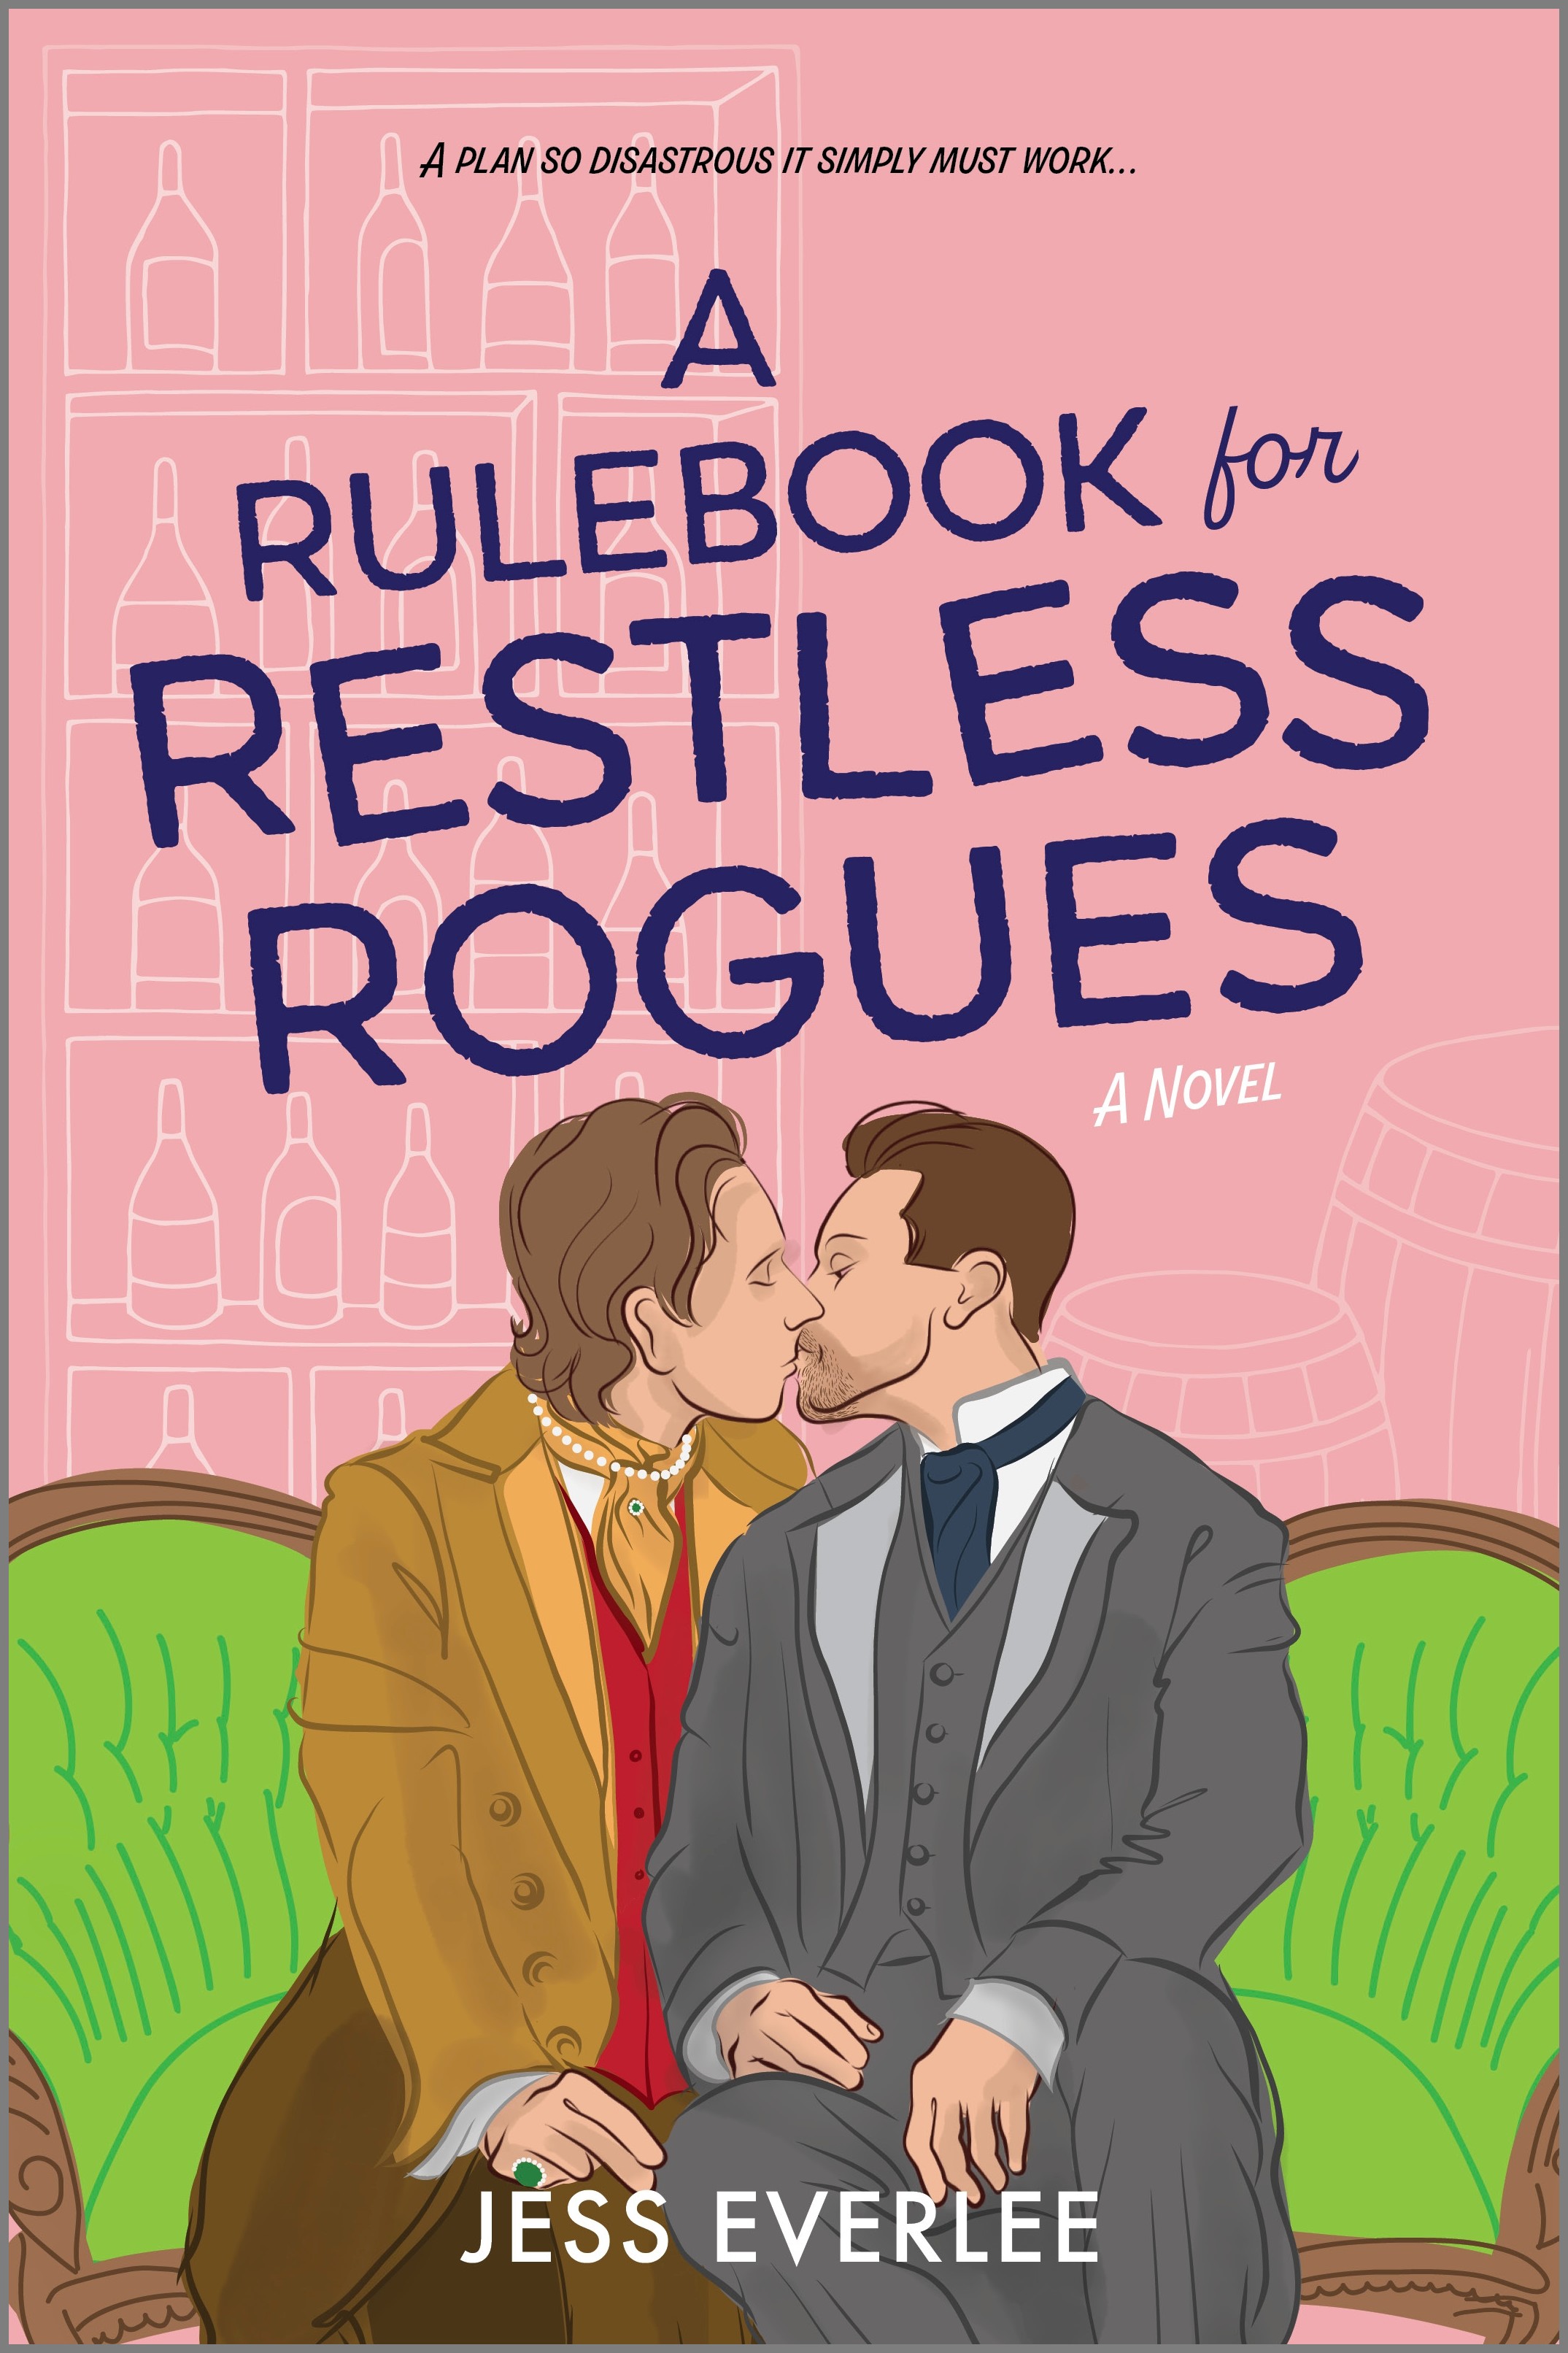 Cover image for A RULEBOOK FOR RESTLESS ROGUES by Jess Everlee, featuring an illustration of two men kissing on a green couch. They are dressed in Victorian suits.